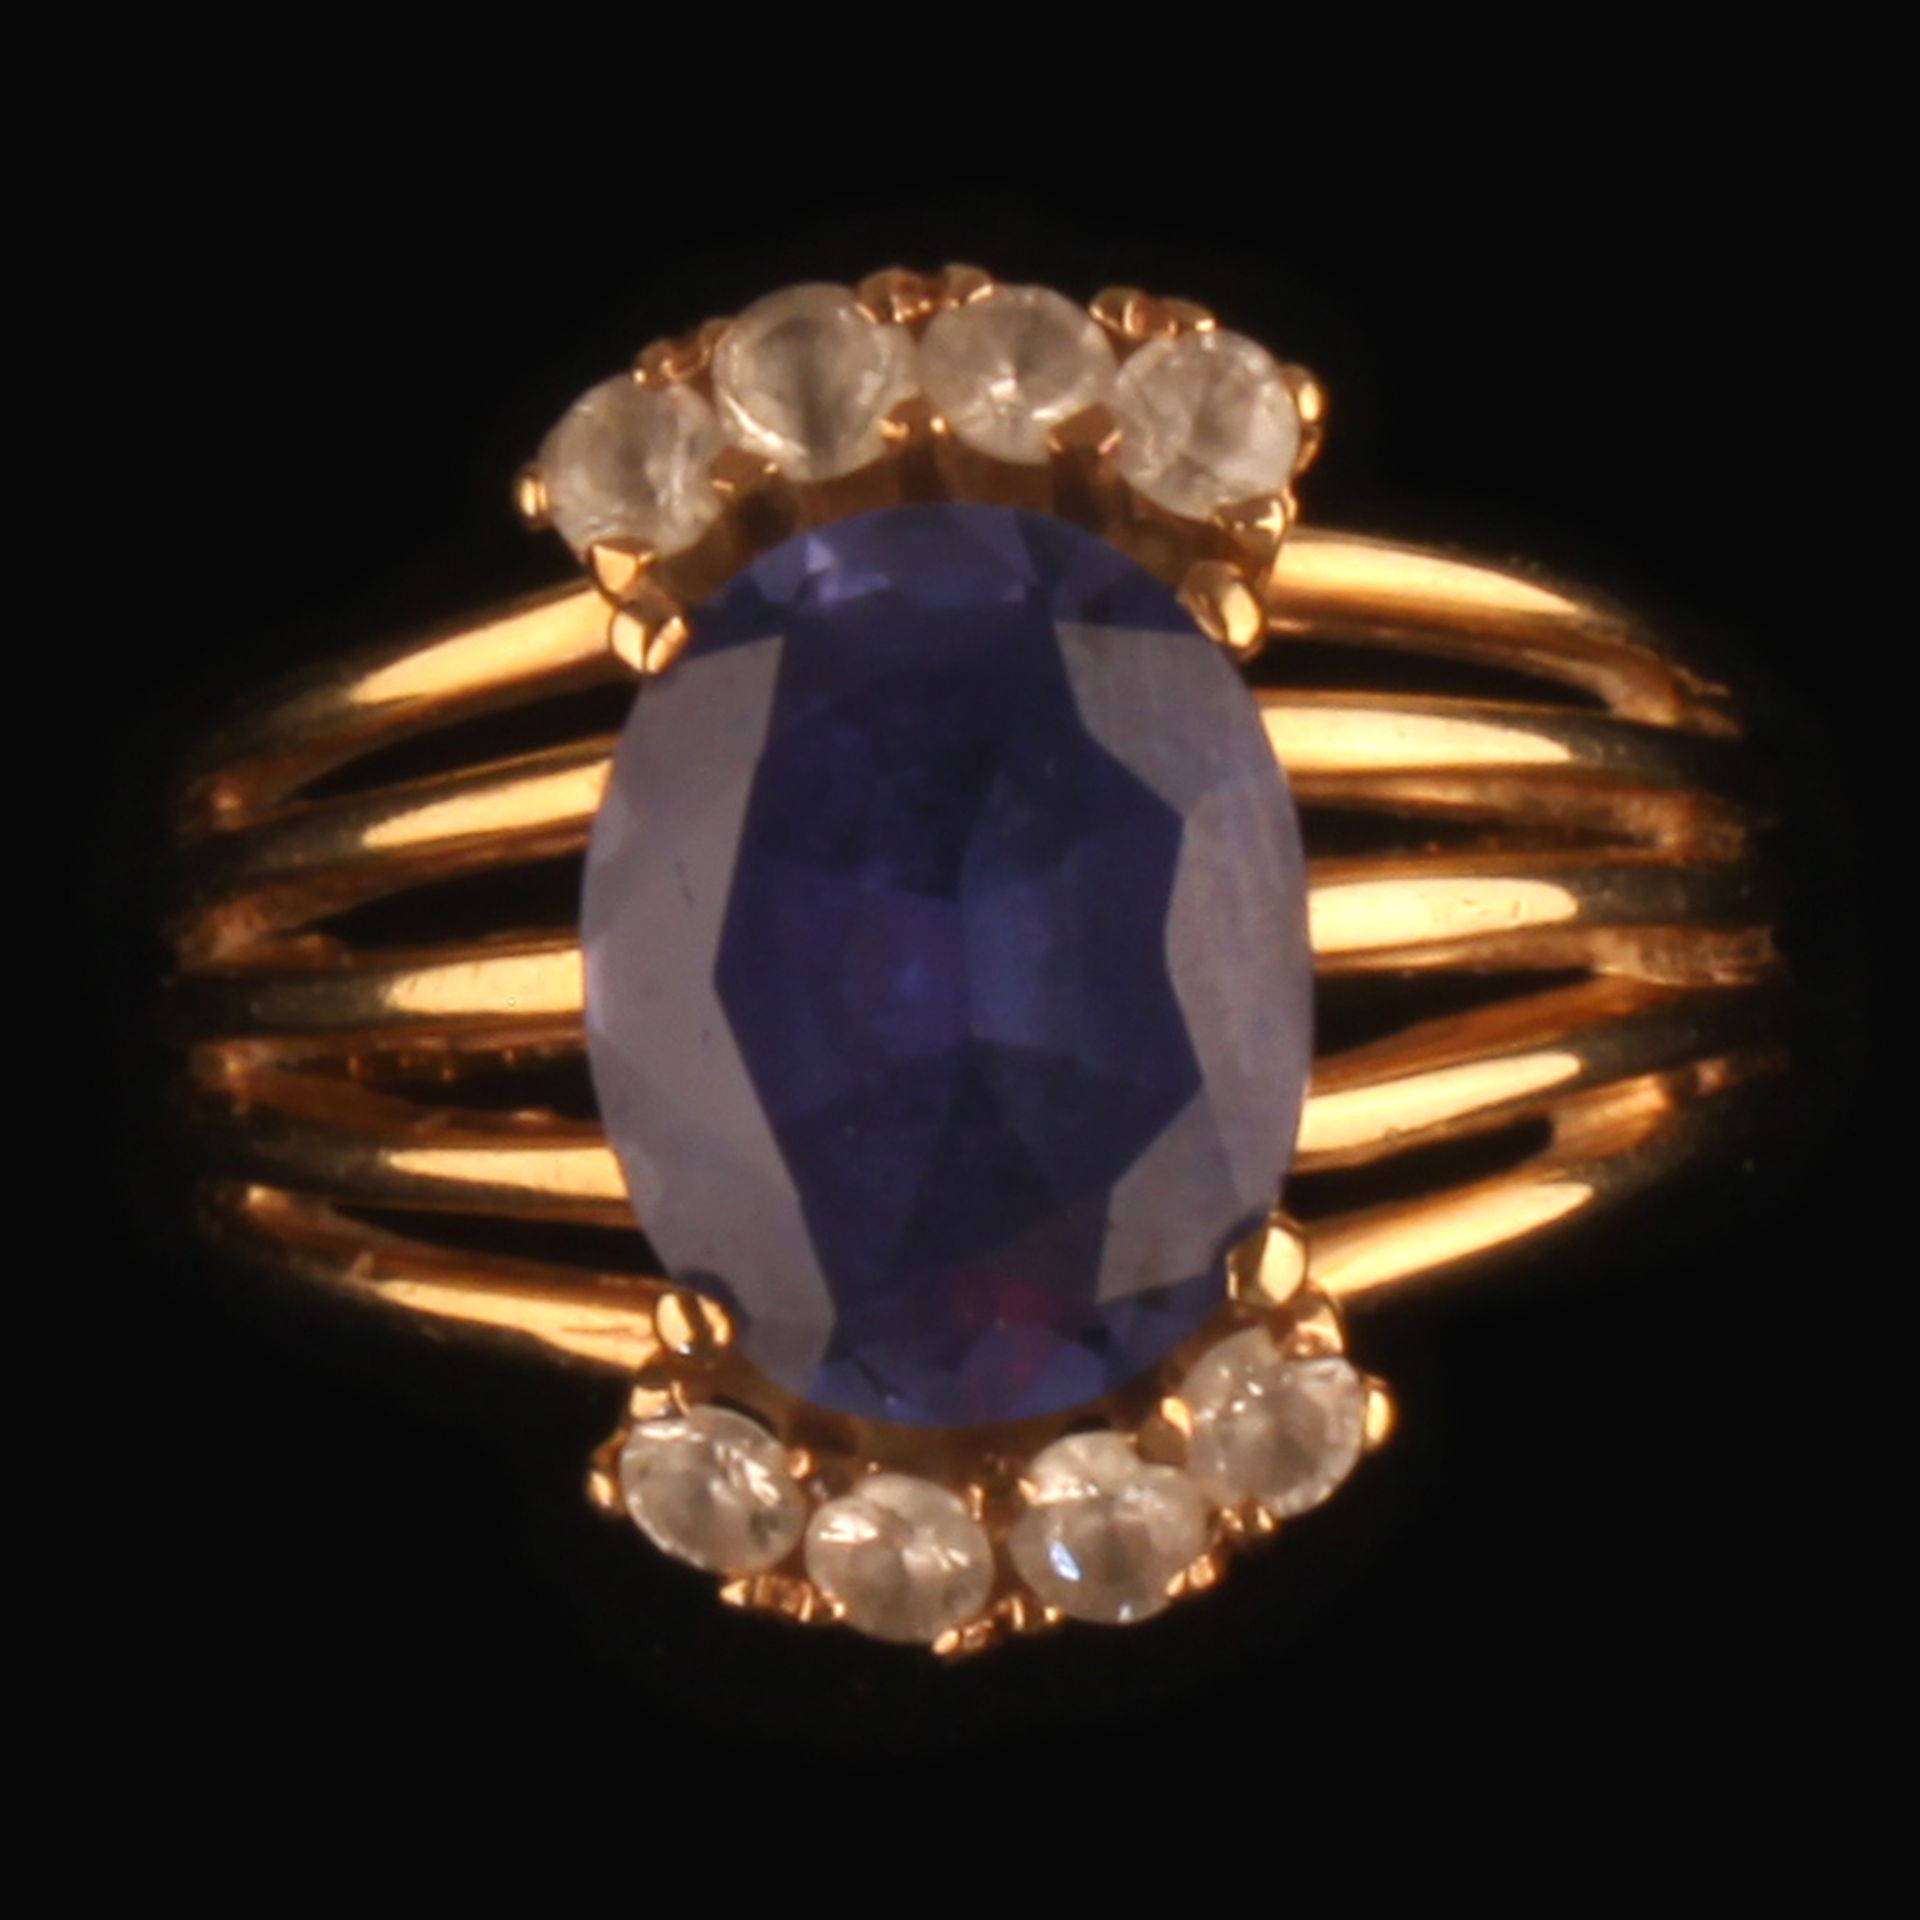 A DRESS RING SET WITH BEAUTIFUL COLOUR LARGE SAPPHIRE +8 WHITE STONES - Image 2 of 4